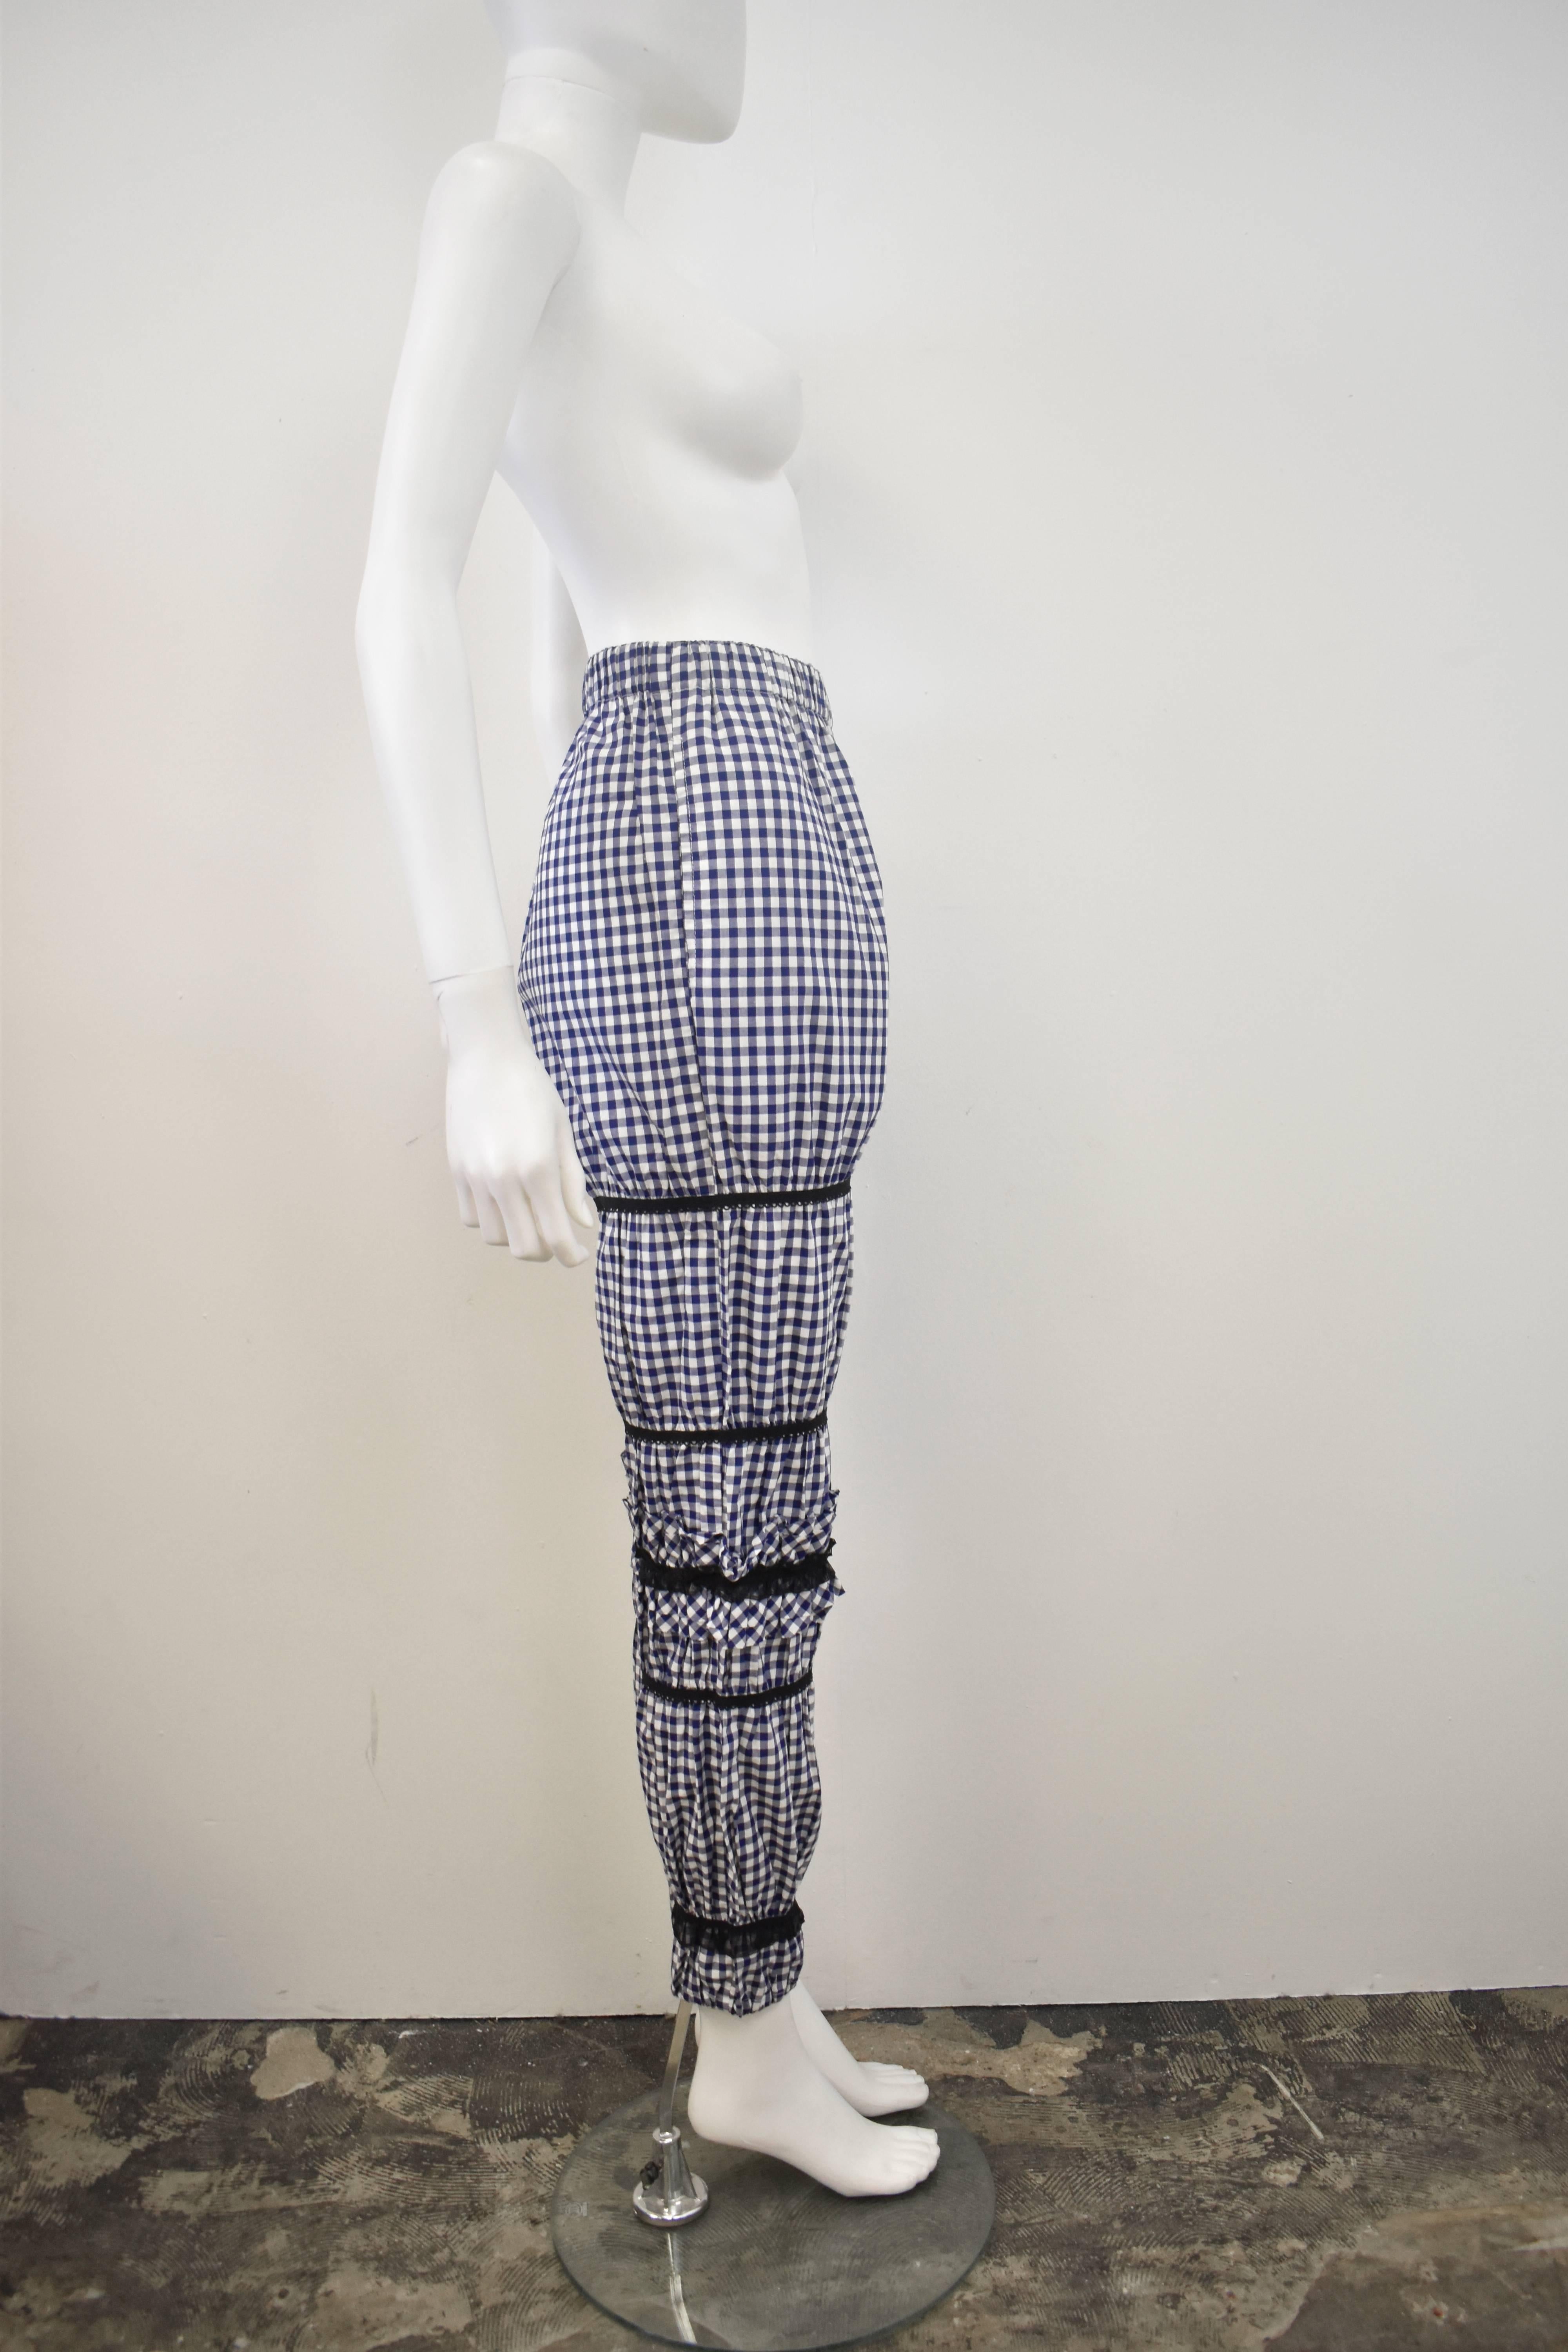 A pair of unusual and interesting trousers from Comme des Garcons. The trousers are made from a blue and white gingham cotton with contrast black bands made of ribbons and trimming that create a tapered shape. There is also an attached ruffle panel